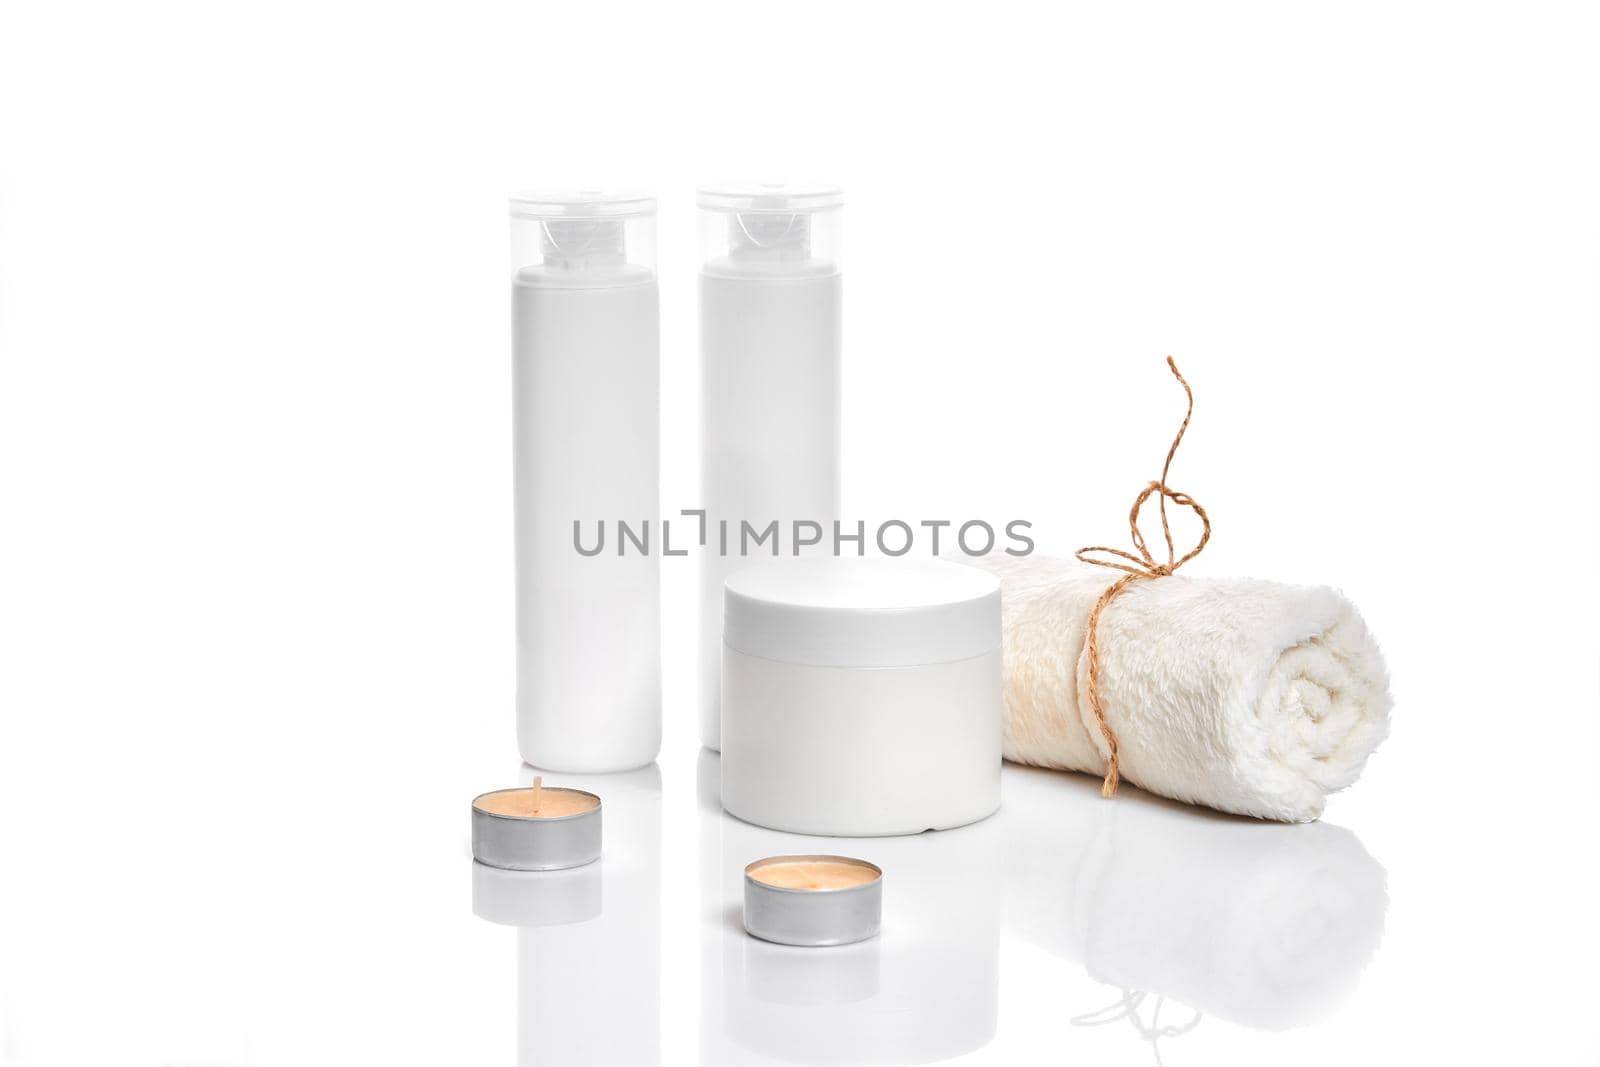 Set of cosmetic products in white containers on light background. Still life. Copy space. Place for your brand